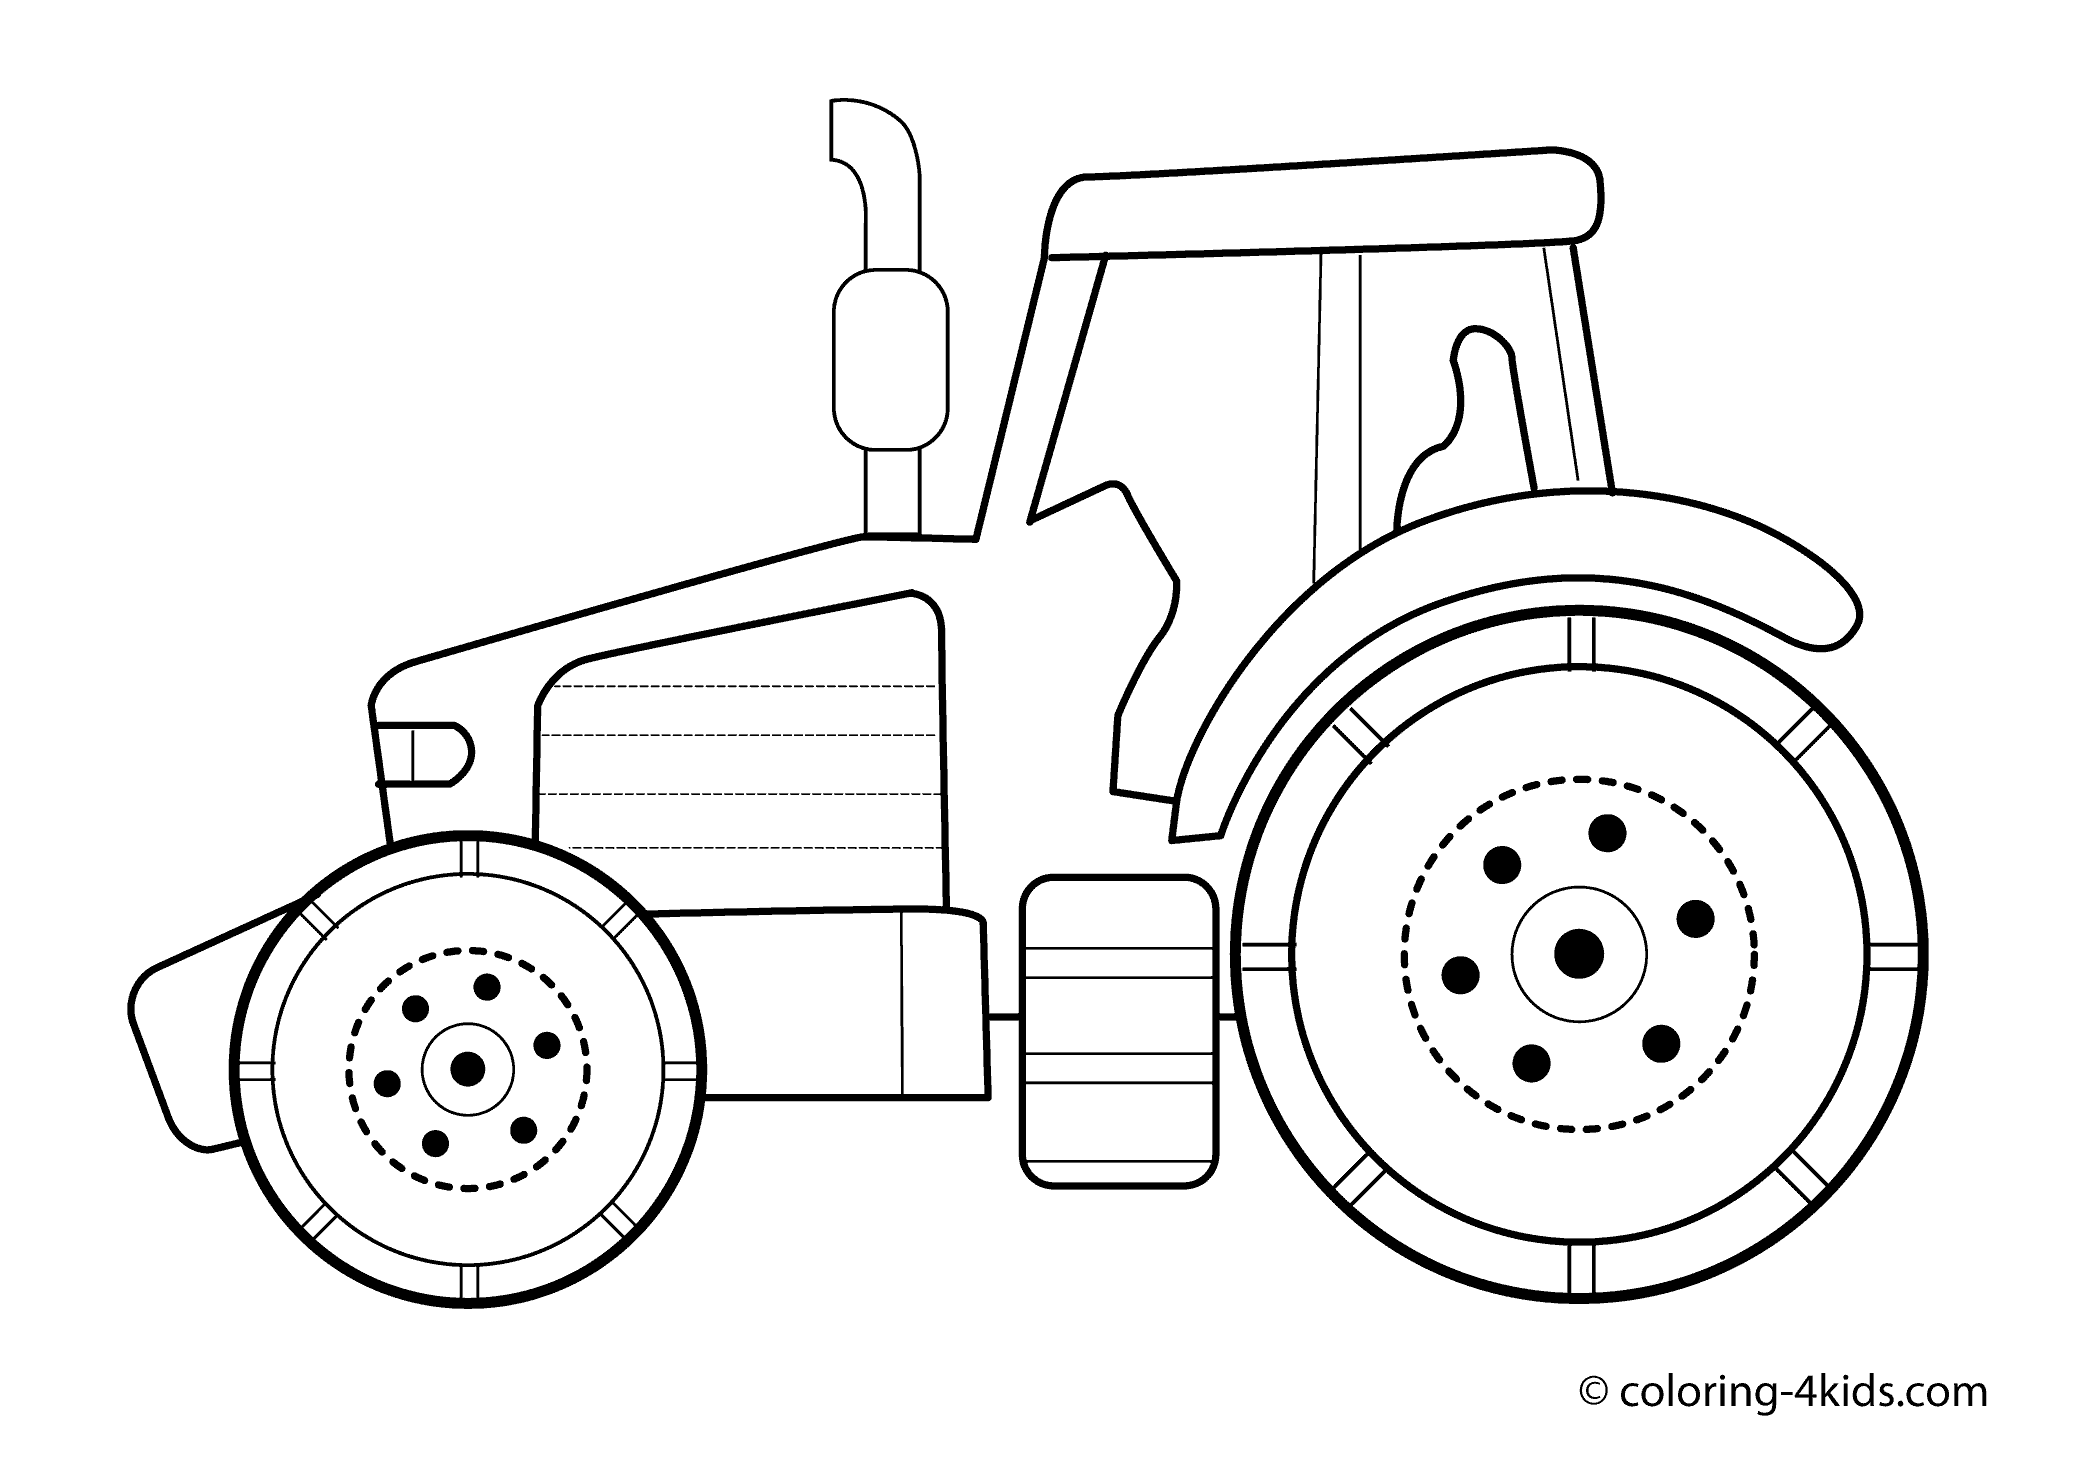 Tractor coloring pages to download and print for free